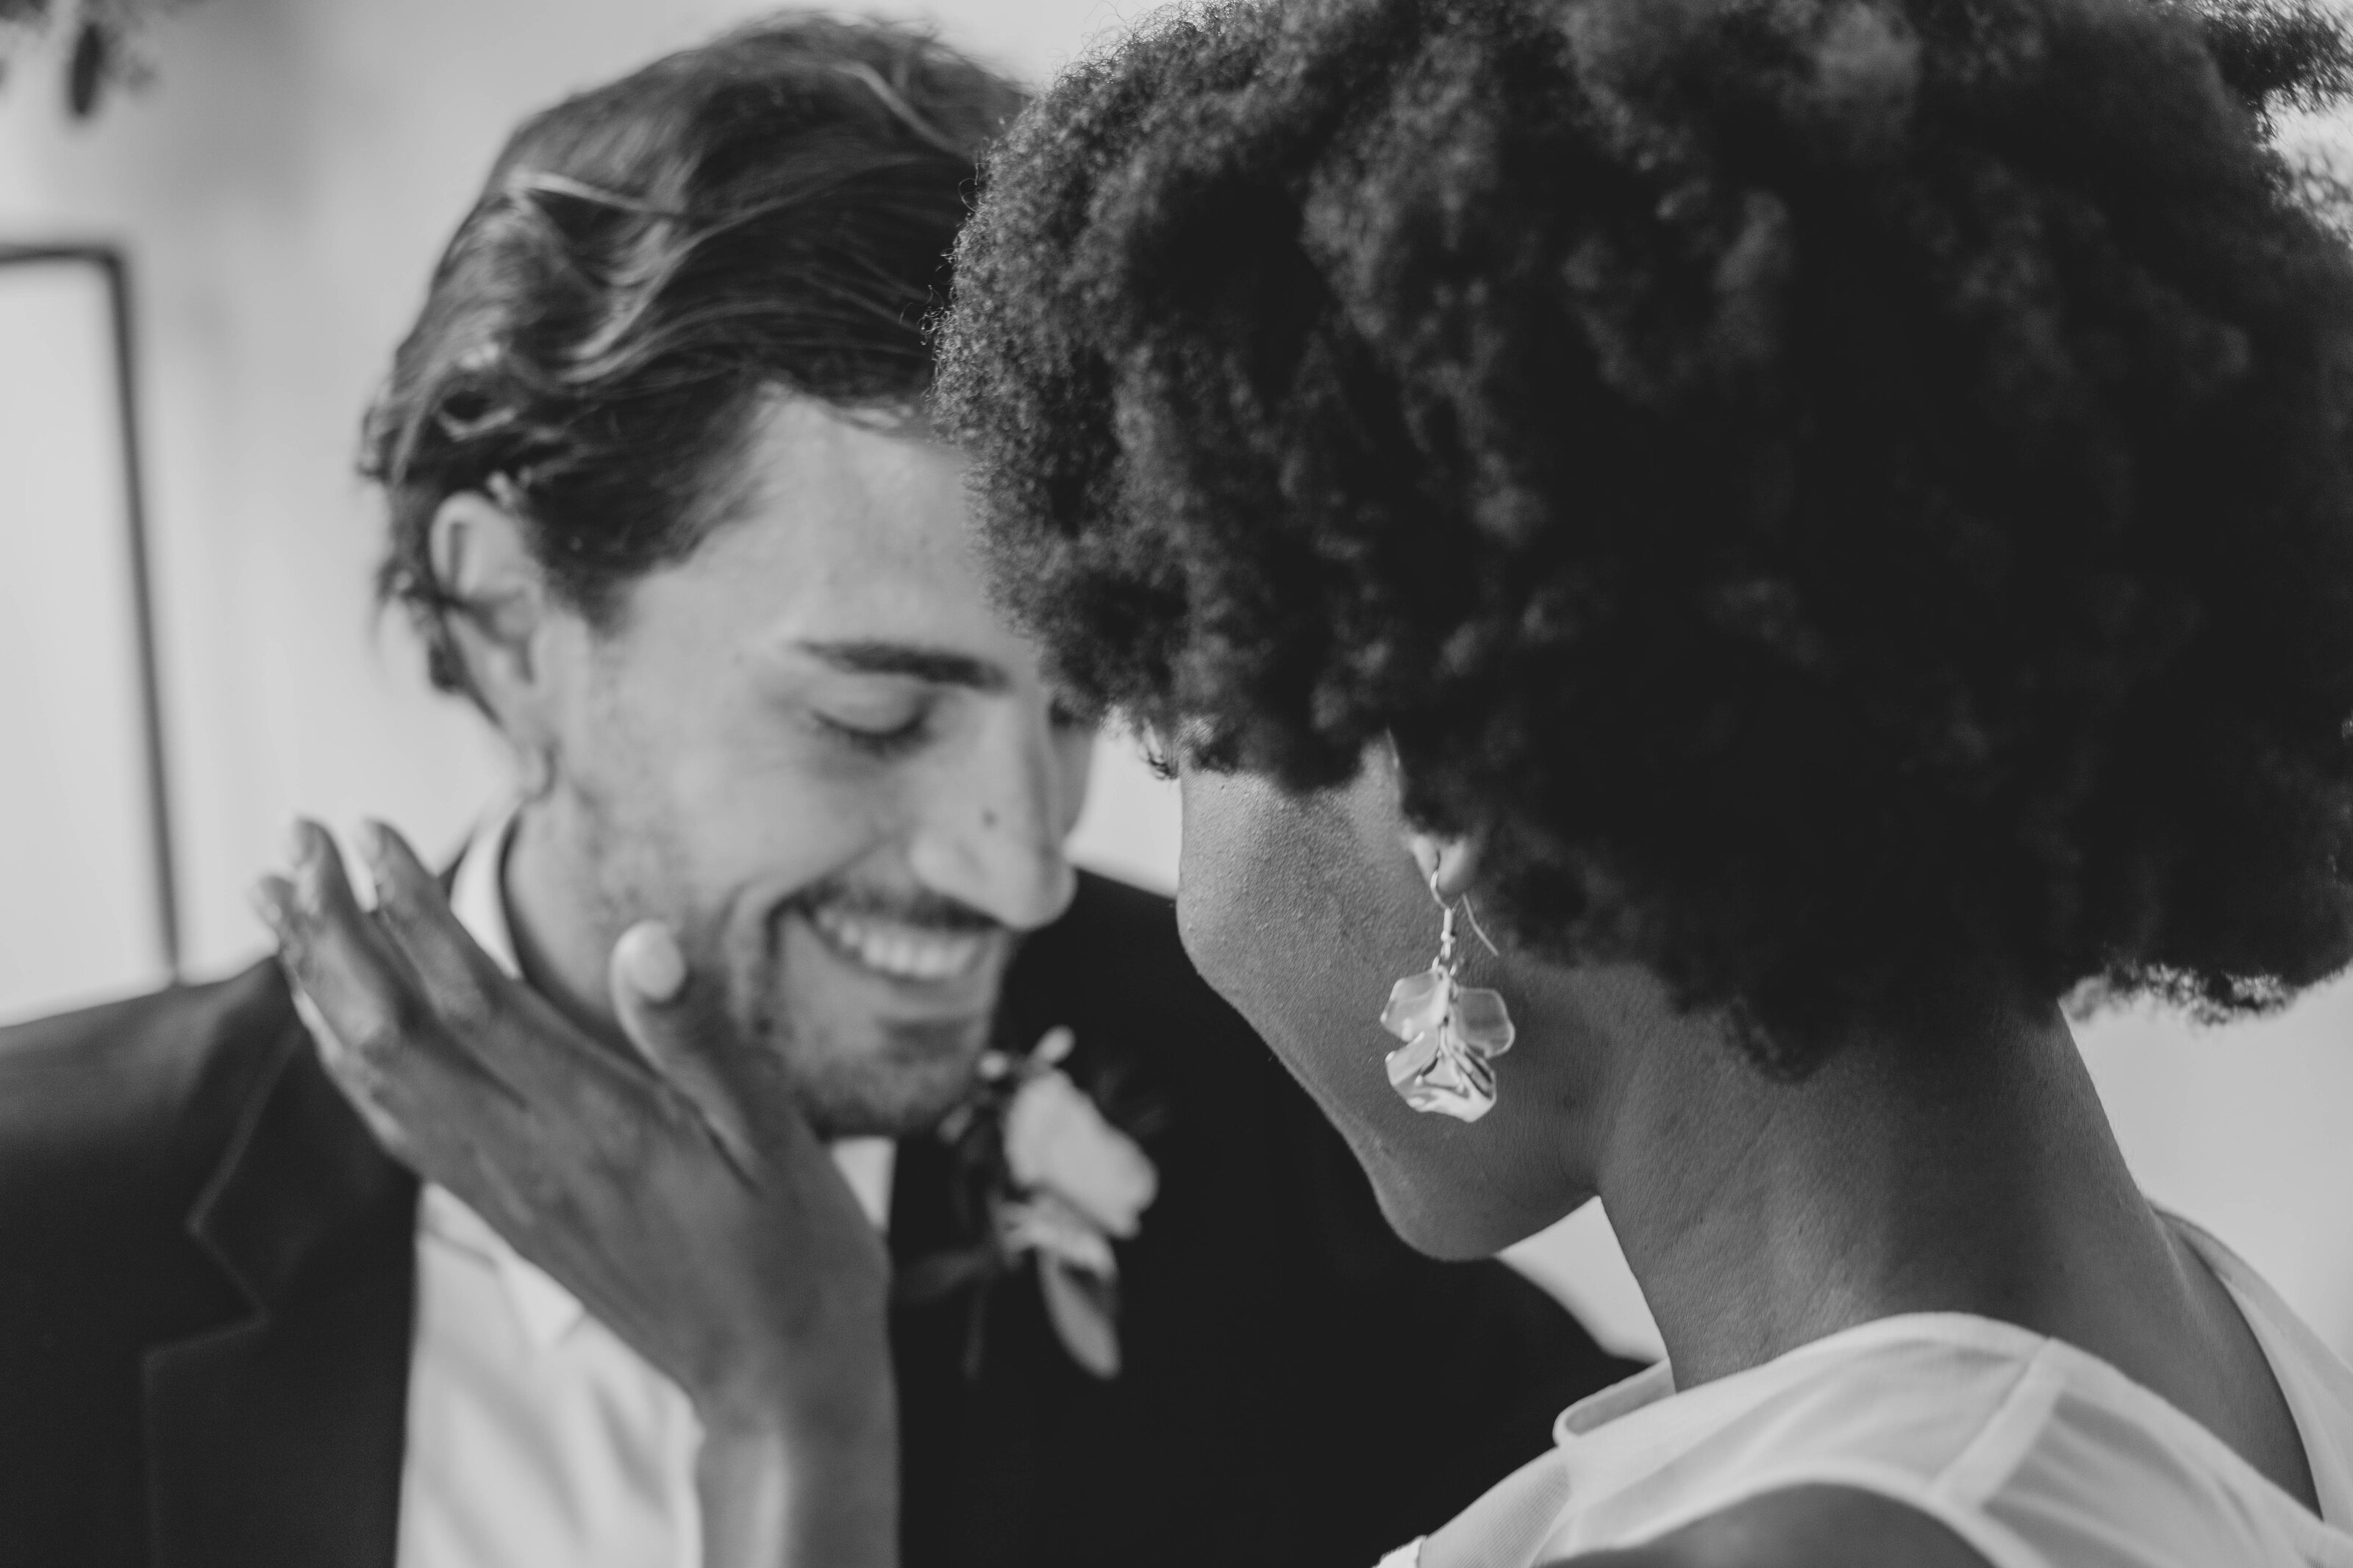 Intimate and candid wedding portrait captured by The Light Photo & Film in Brisbane